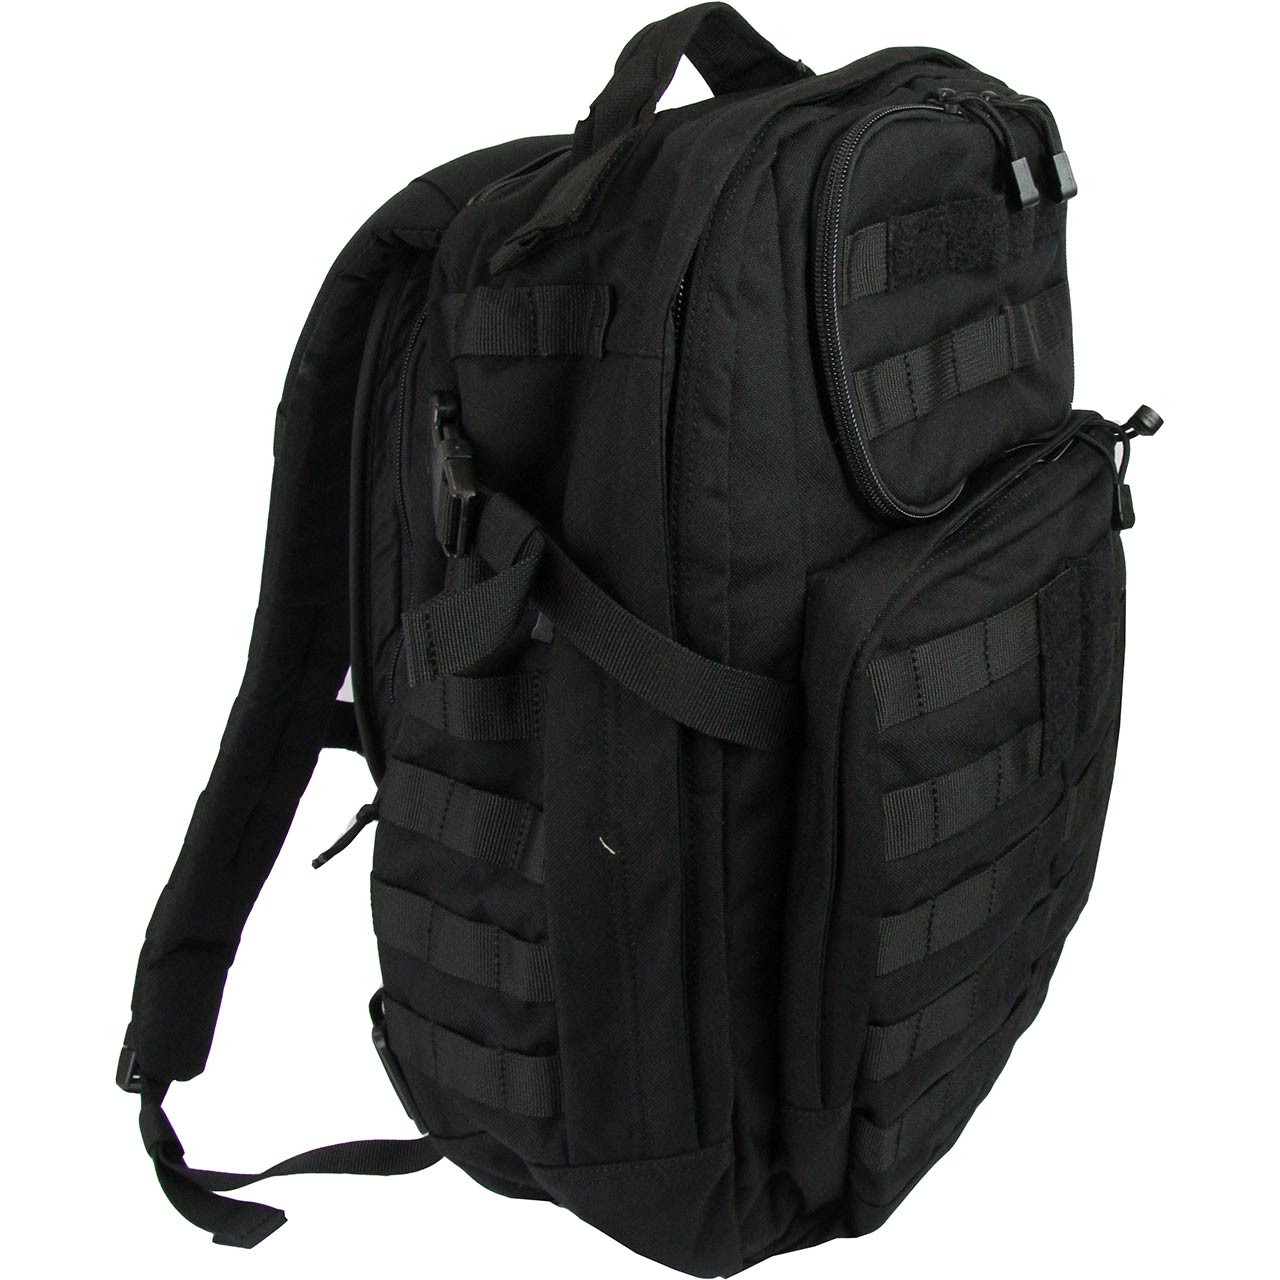 https://cdn11.bigcommerce.com/s-rd4j7/images/stencil/1280x1280/products/2043/11284/70-0573-5_11-Rush-24-Backpack-Tactical-Black-side__02080.1571337793.jpg?c=2